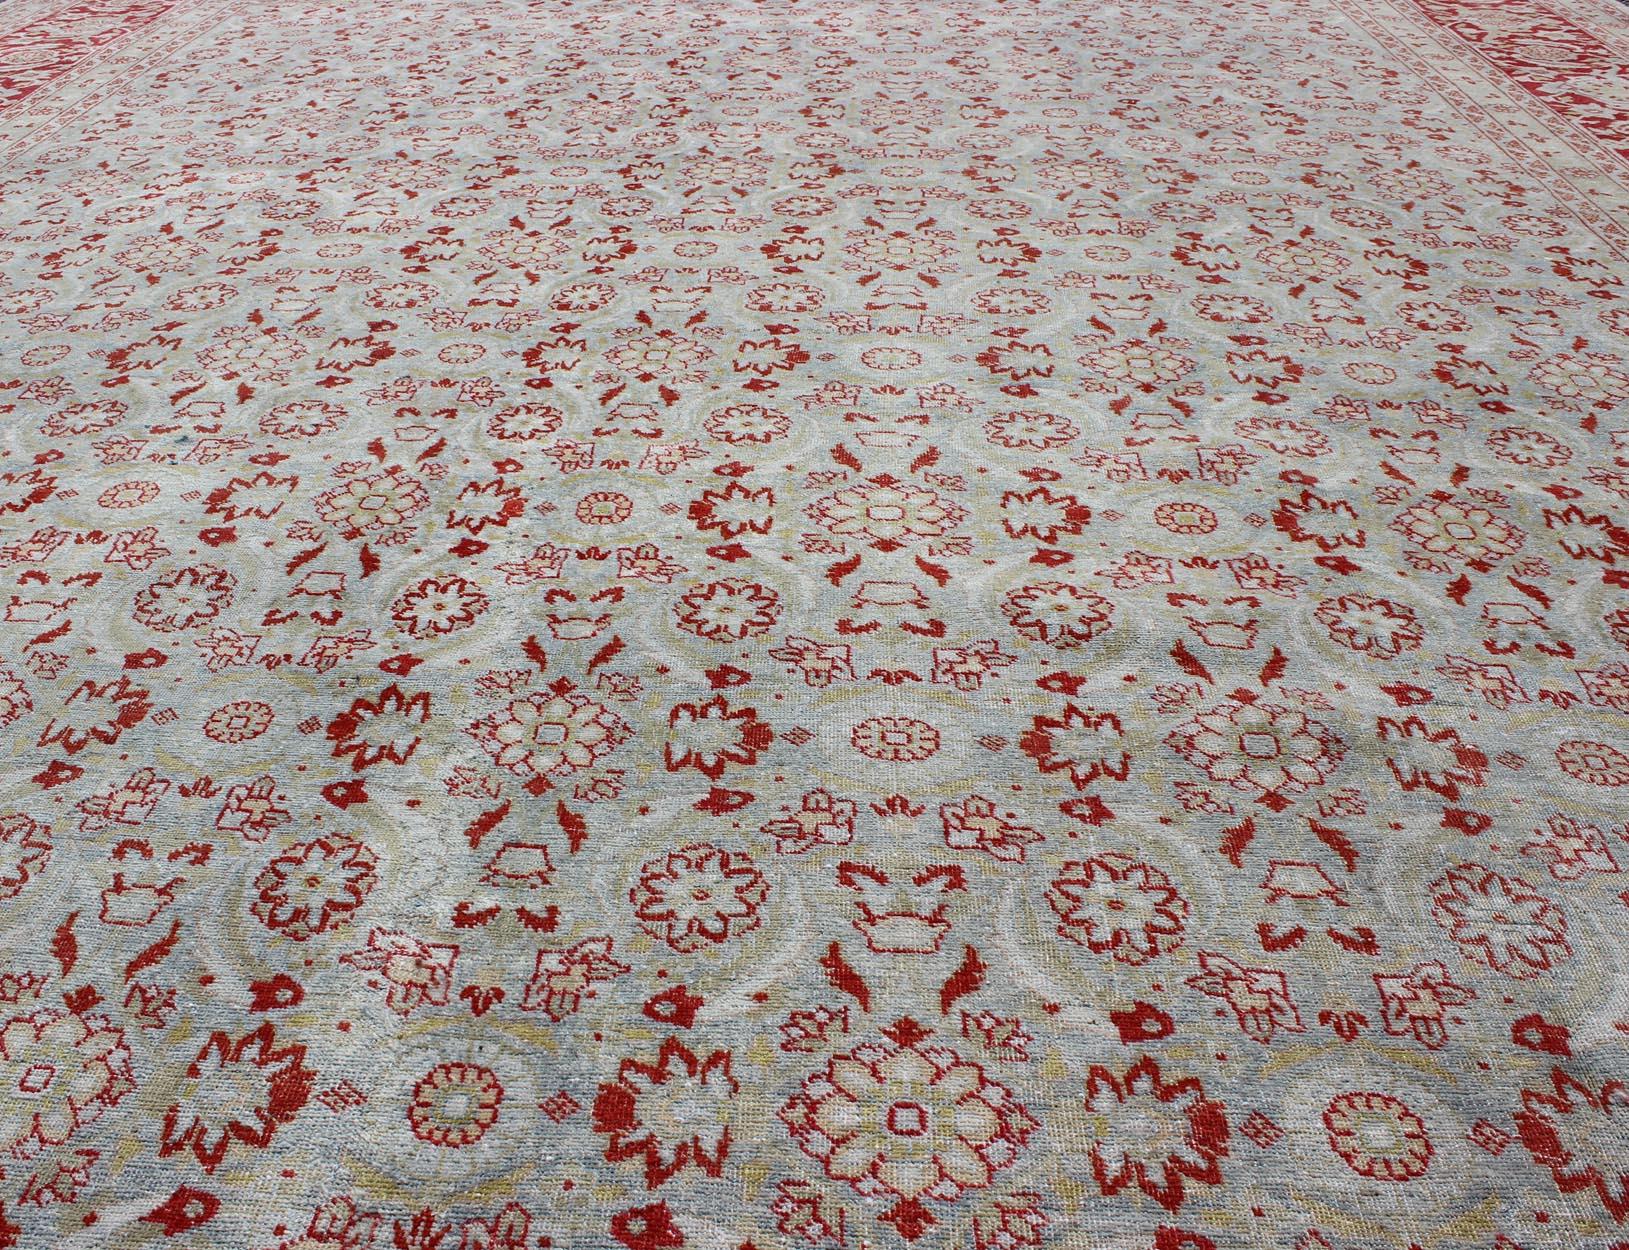 All-Over Floral Design Antique Persian Tabriz Rug in Shades of Gray-Blue and Red For Sale 3